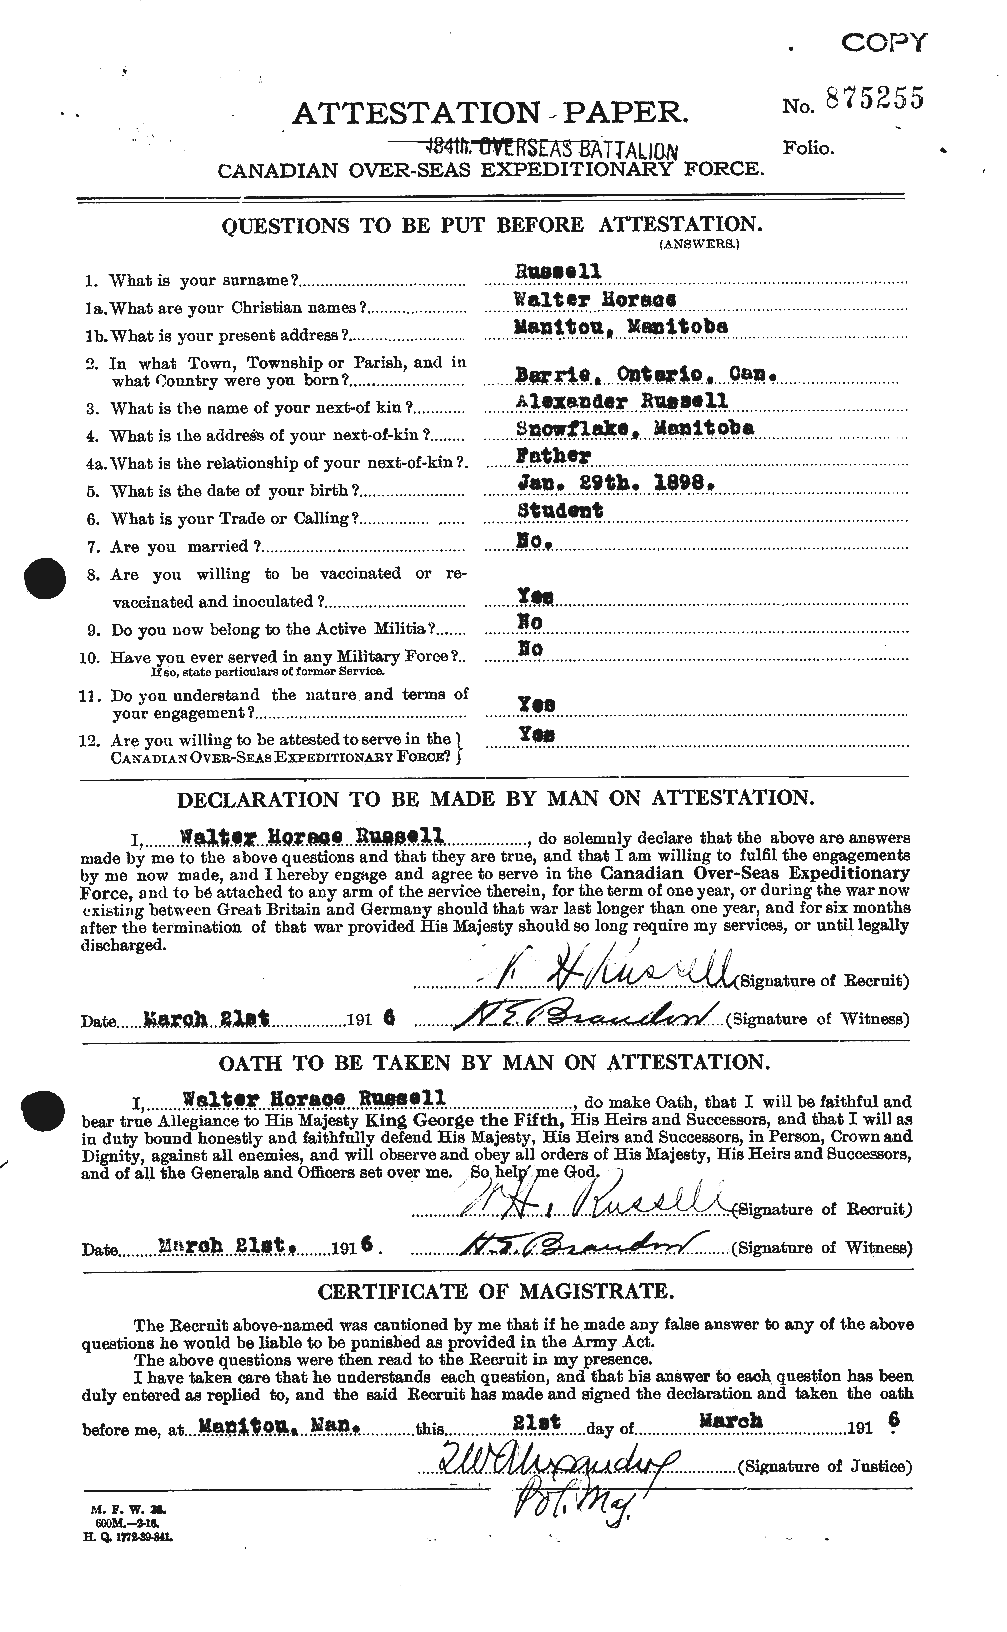 Personnel Records of the First World War - CEF 618091a